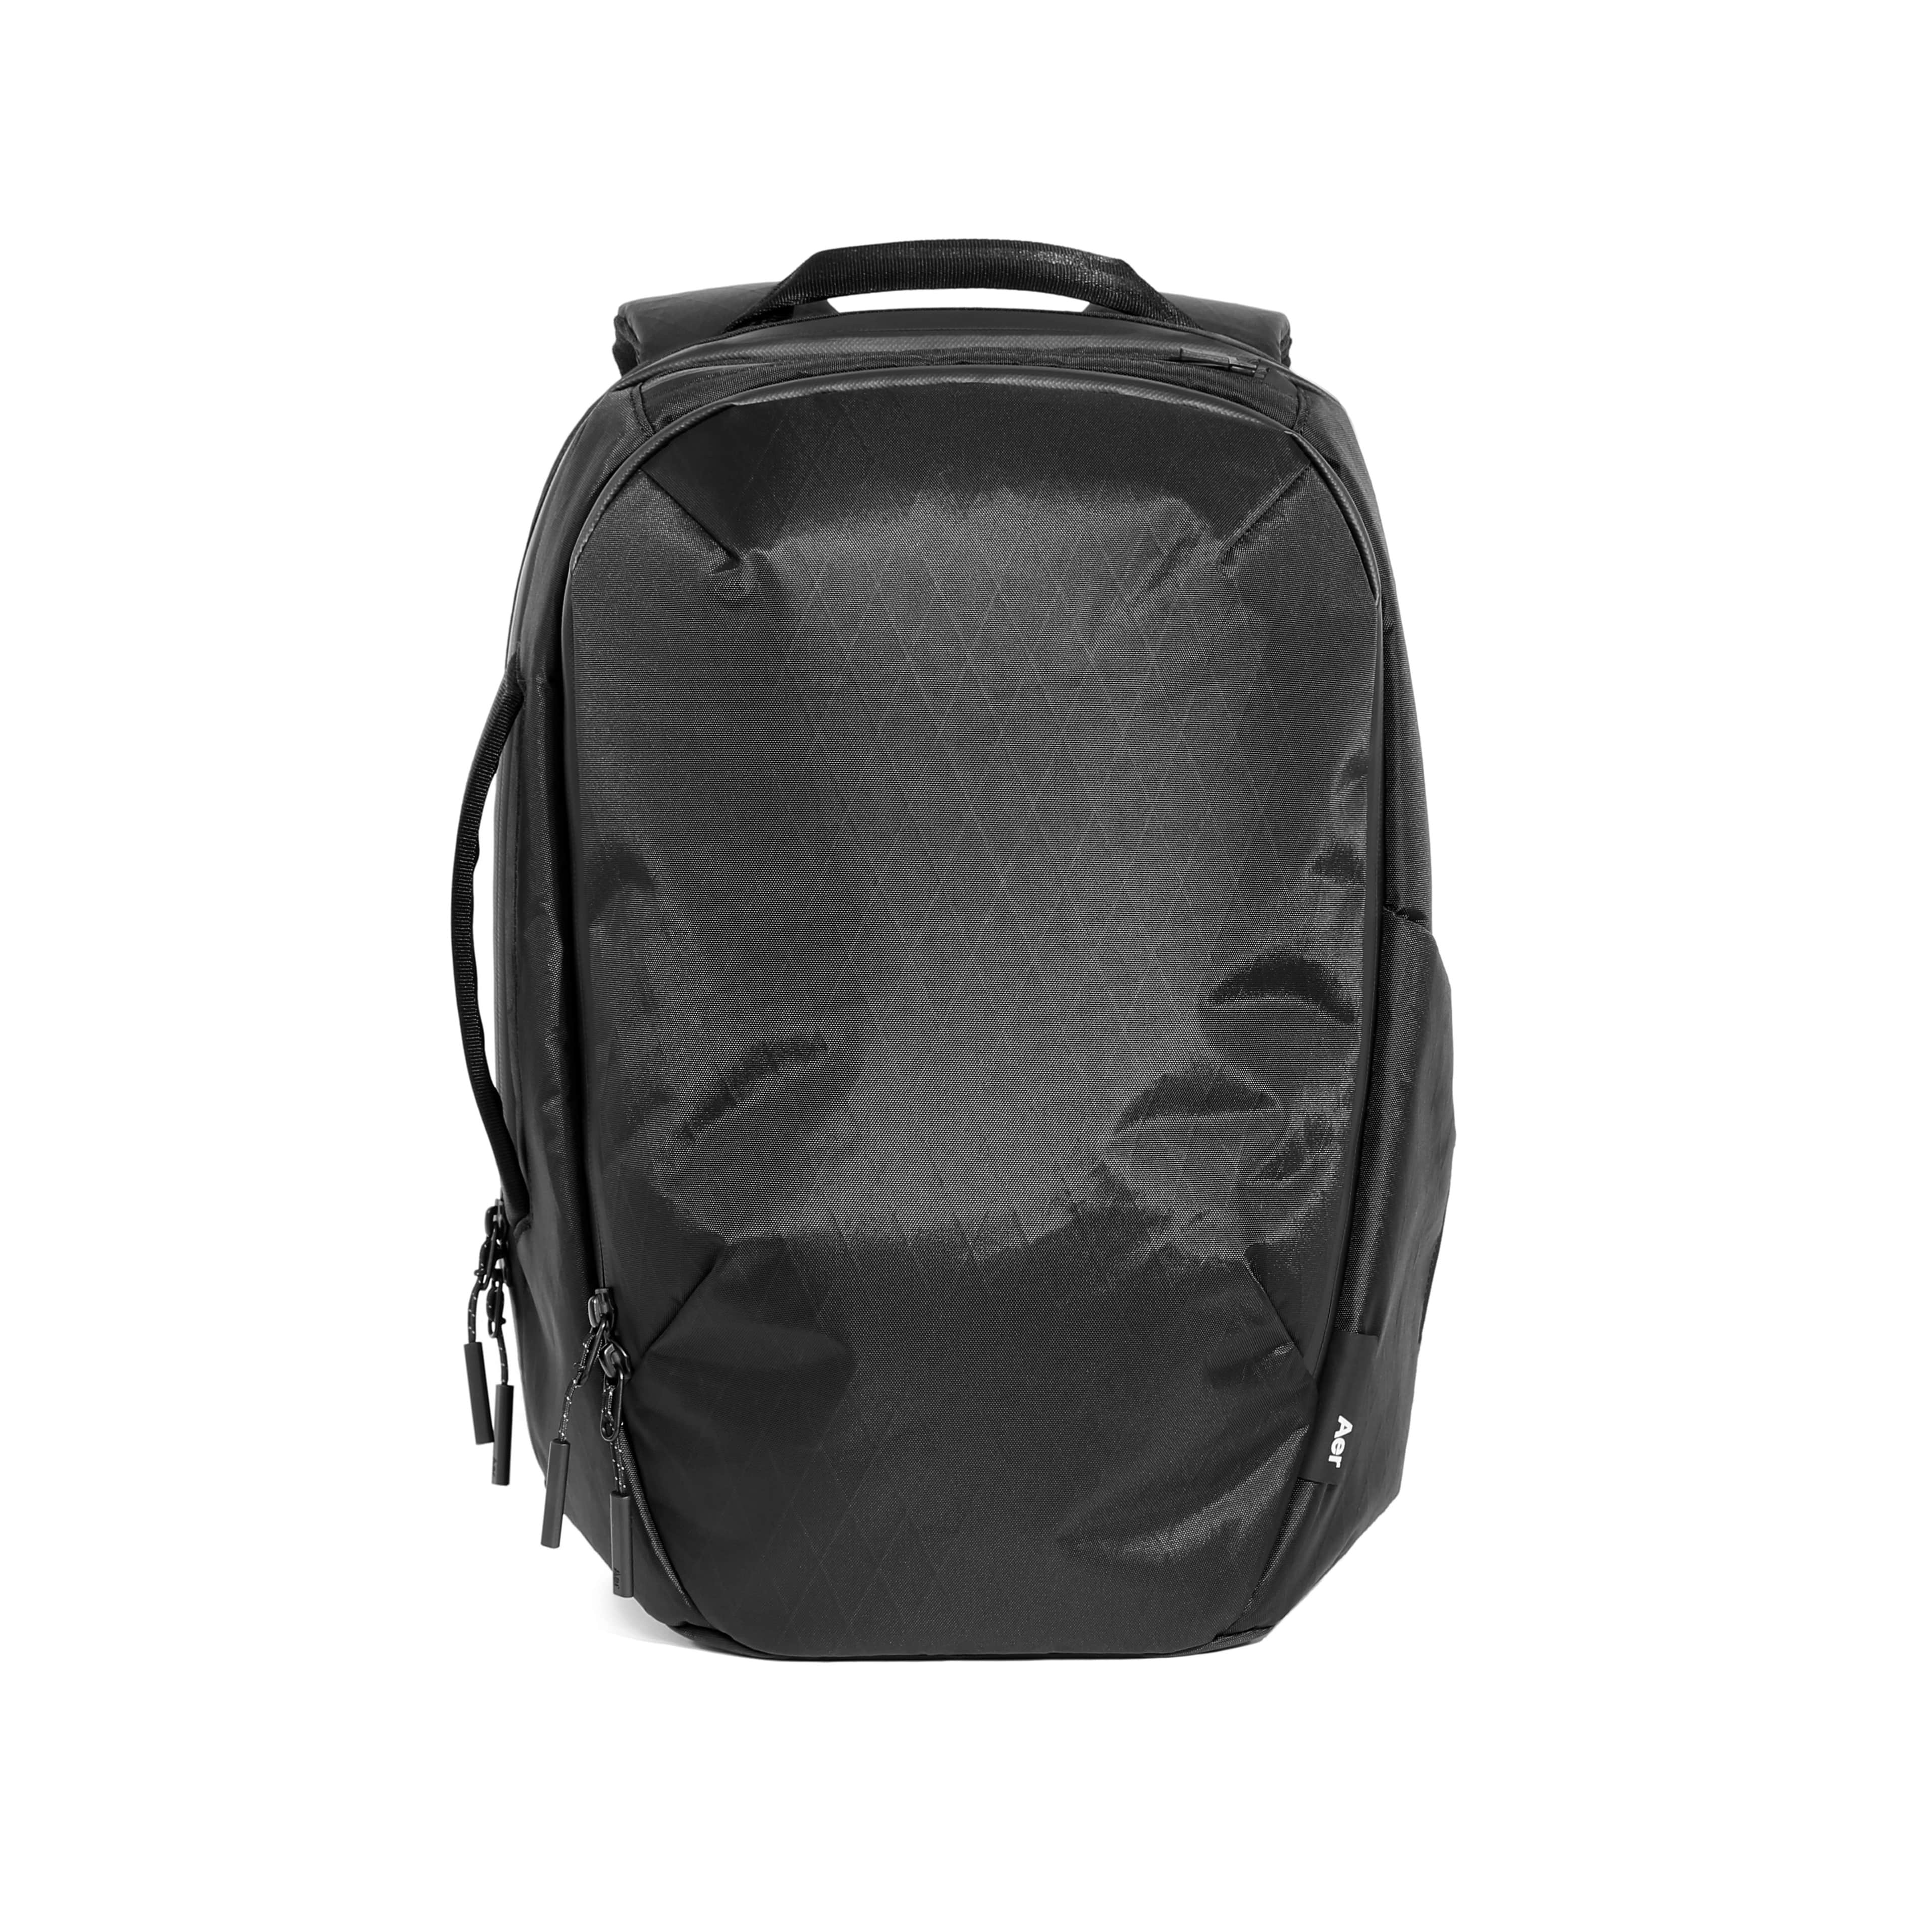 AER】Day Pack 3 X-Pac(Free Black)｜ MSPCプロダクト ソート｜名古屋 ...